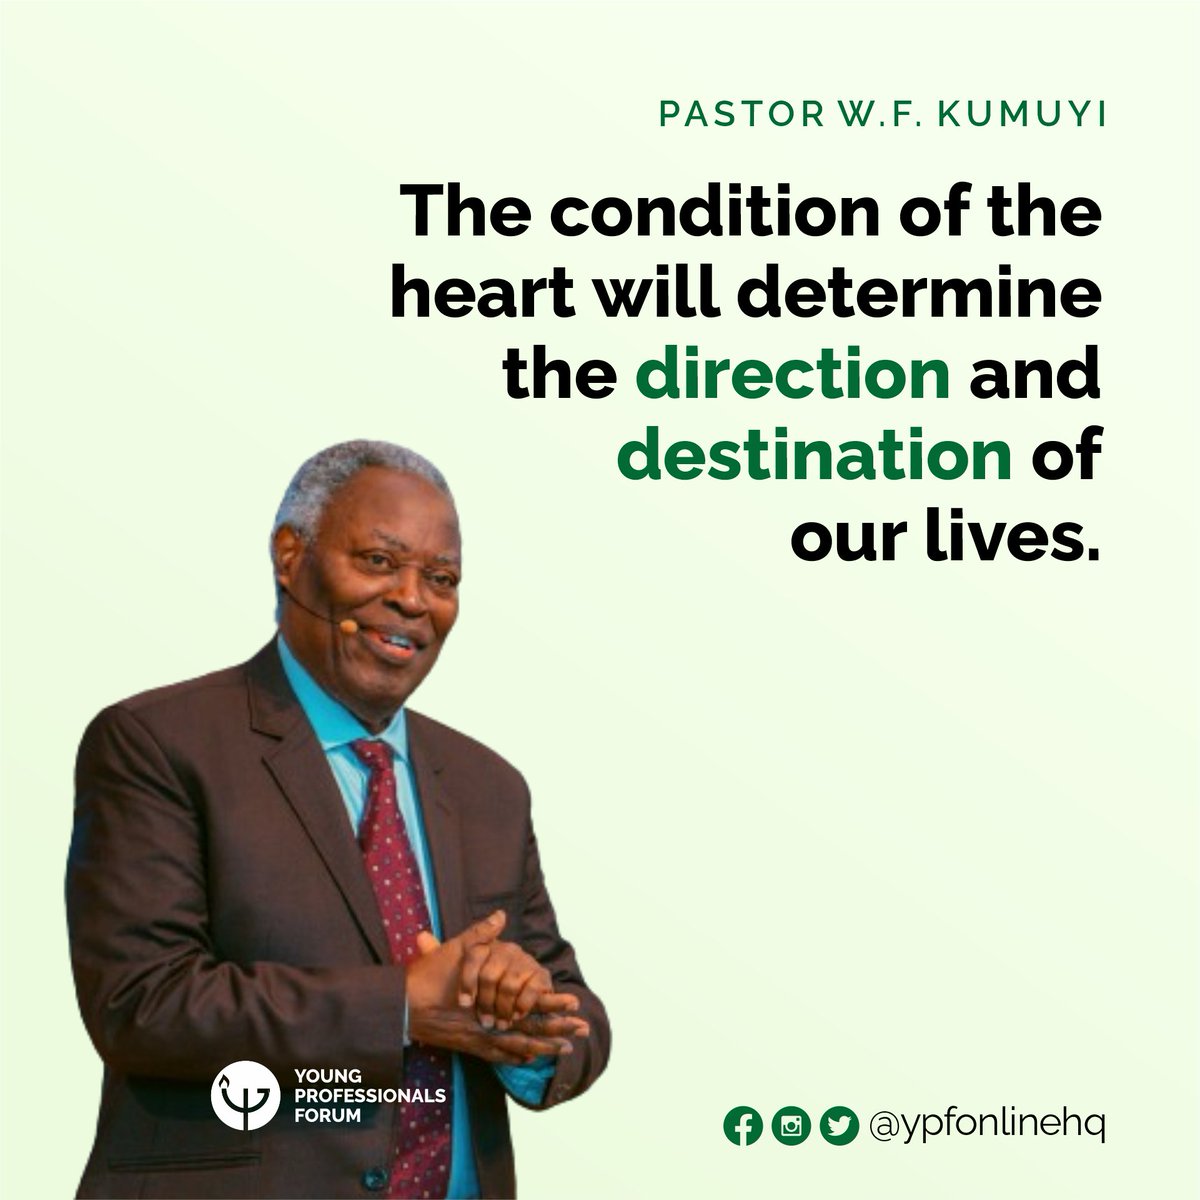 The condition of the heart will determine the direction and destination of our lives. - Pastor W.F. Kumuyi #YPFOnlineHq #hearthealth